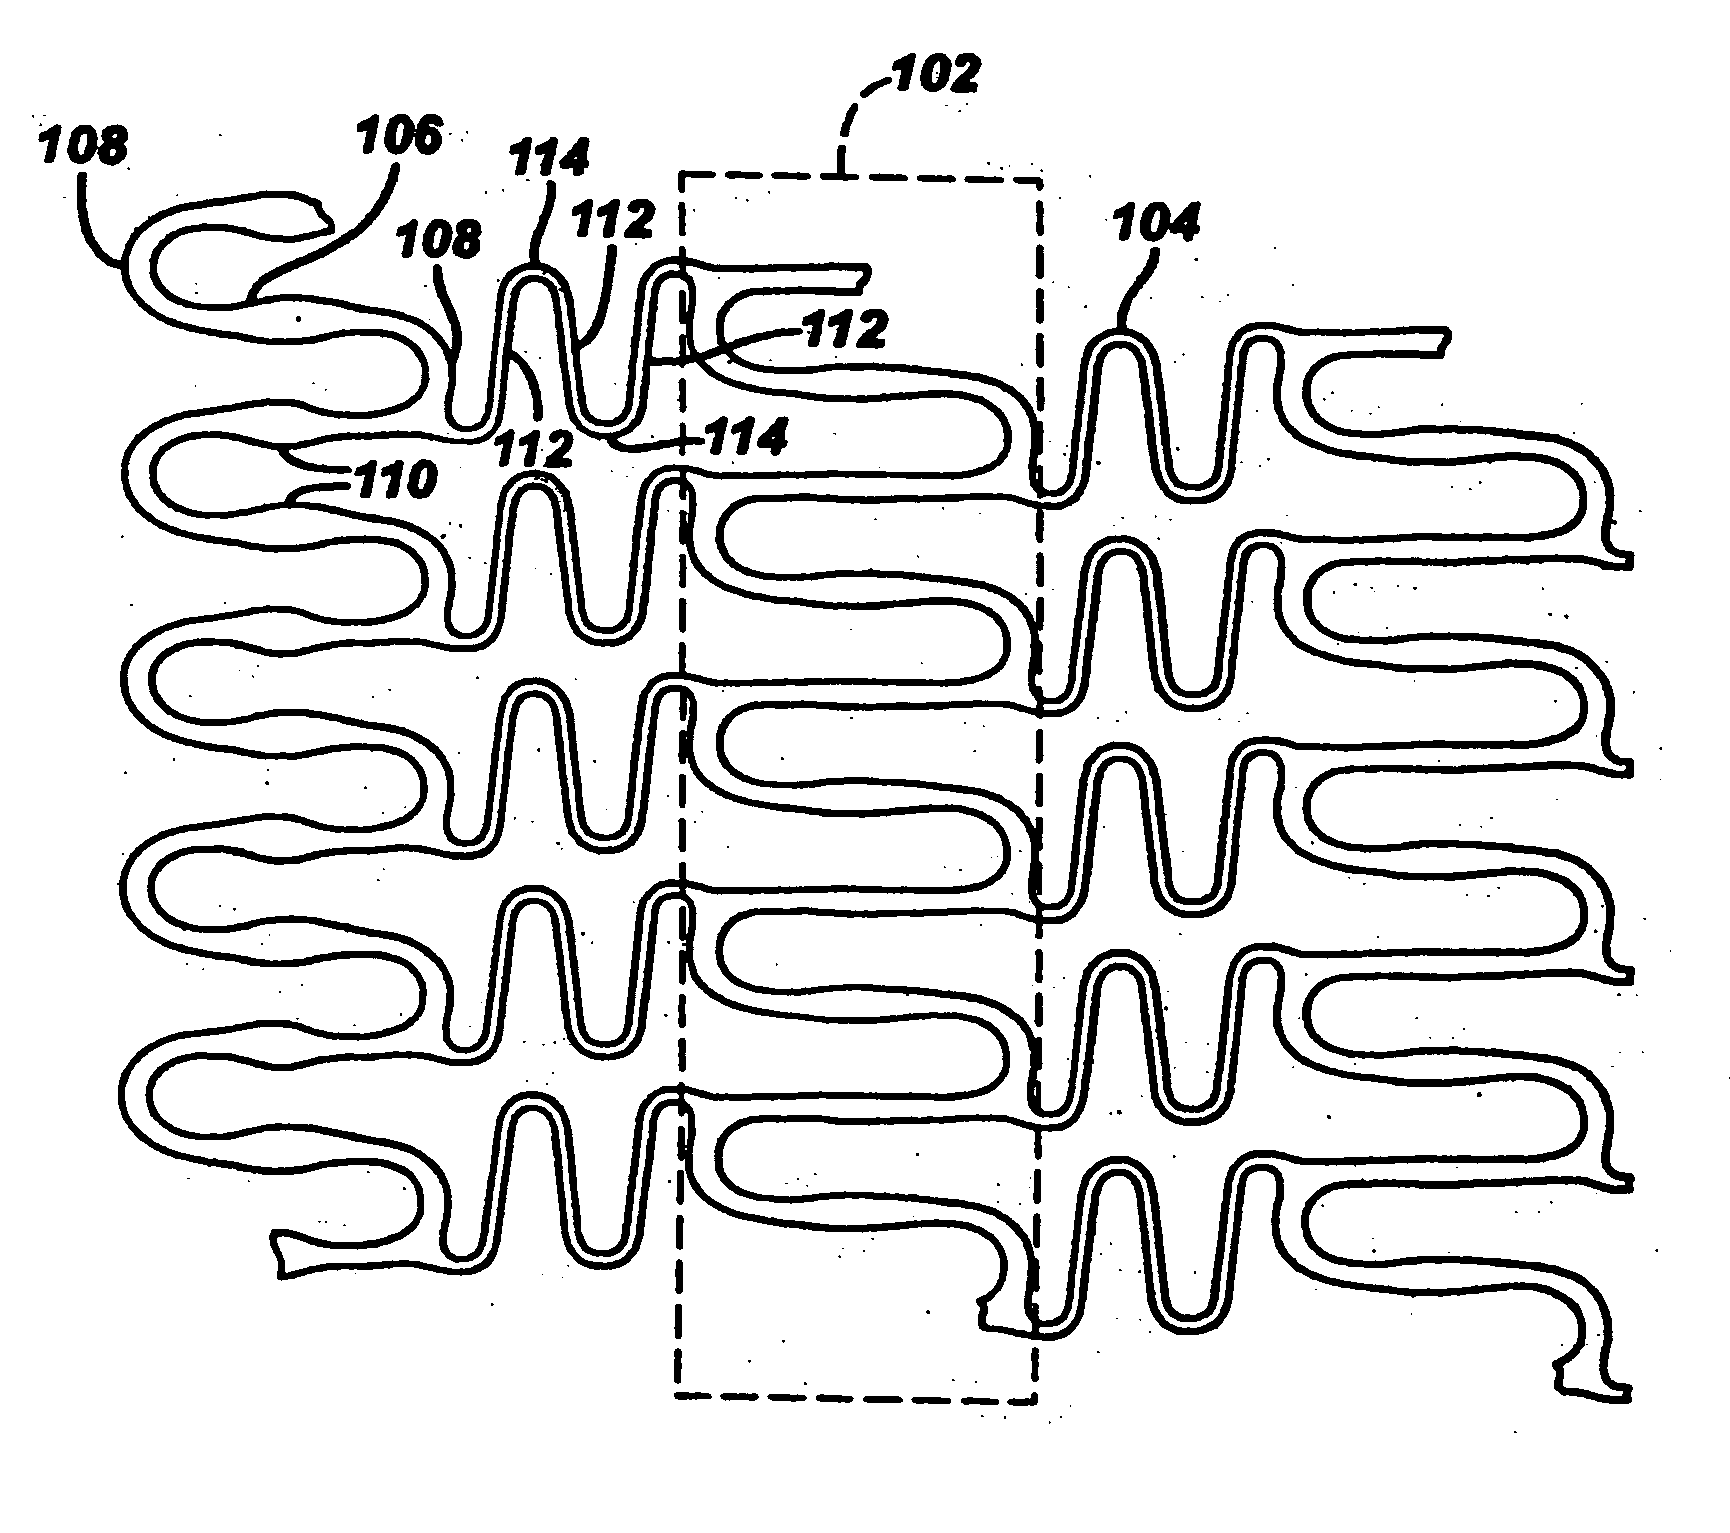 Polymeric stent having modified molecular structures in the flexible connectors and in the radial struts and the radial arcs of the hoops